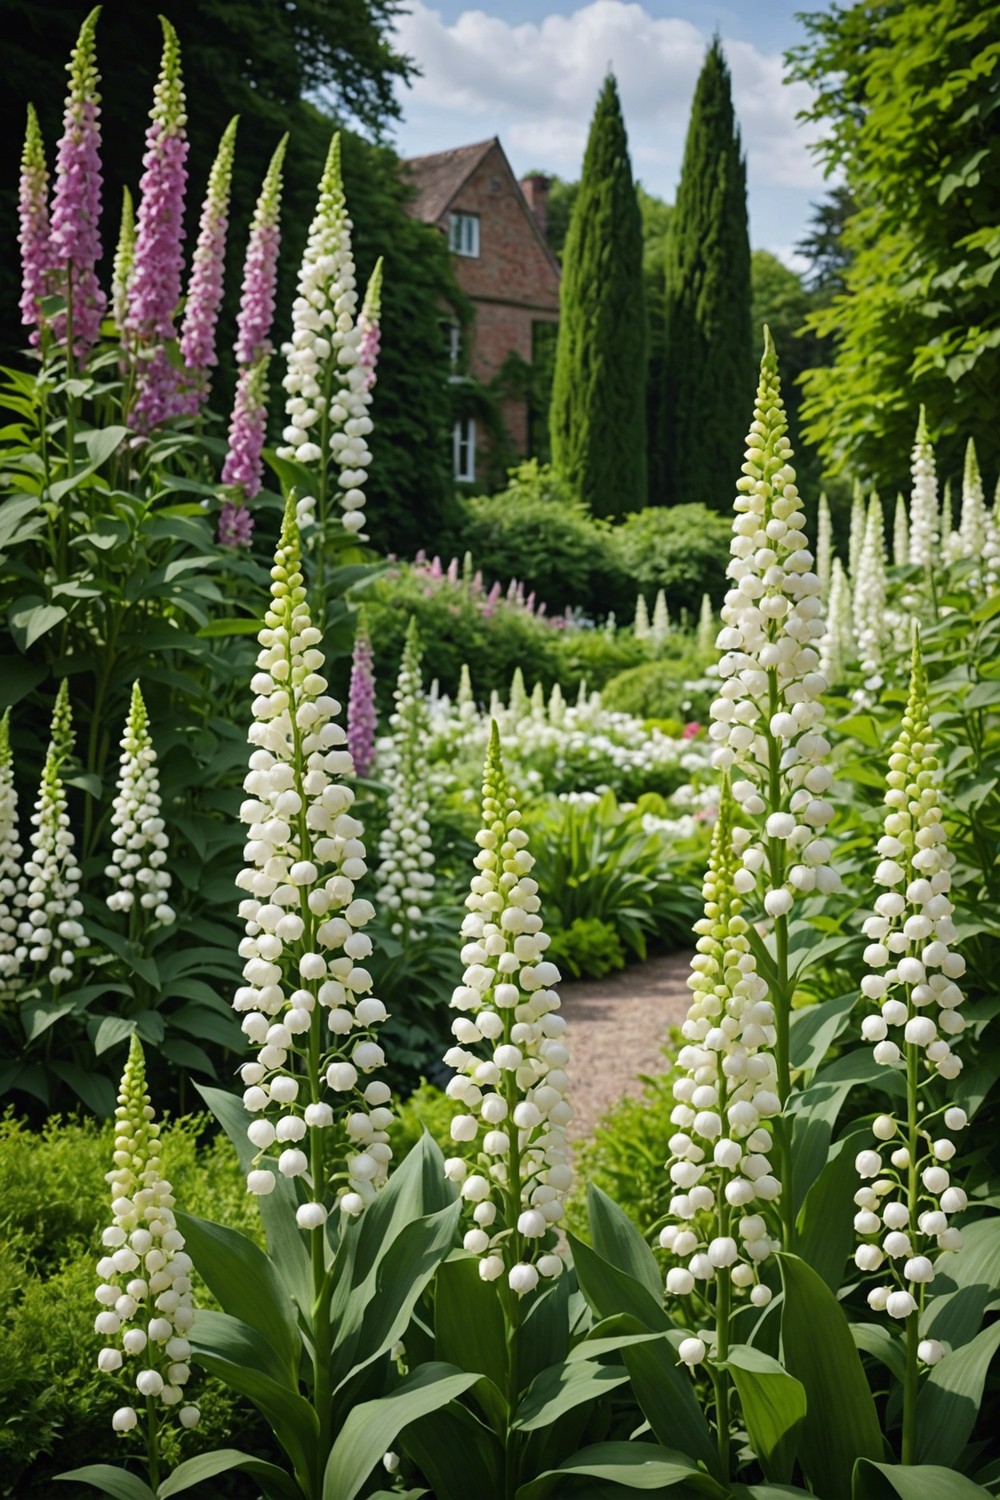 Combine Lily of the Valley with Foxgloves for a Dramatic Garden Statement